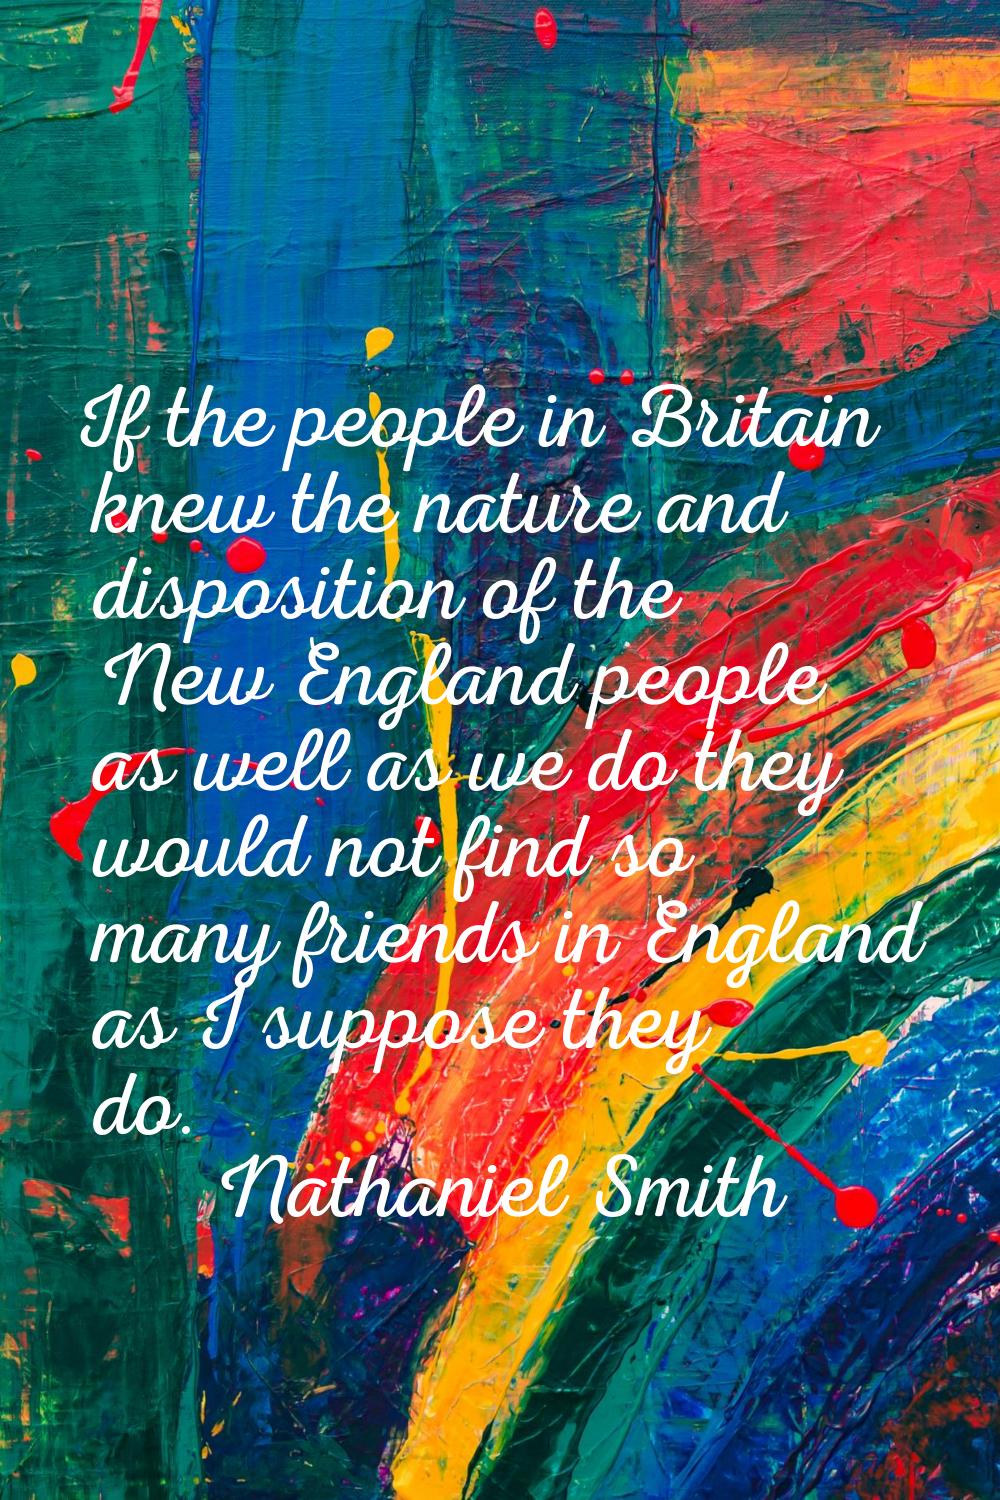 If the people in Britain knew the nature and disposition of the New England people as well as we do